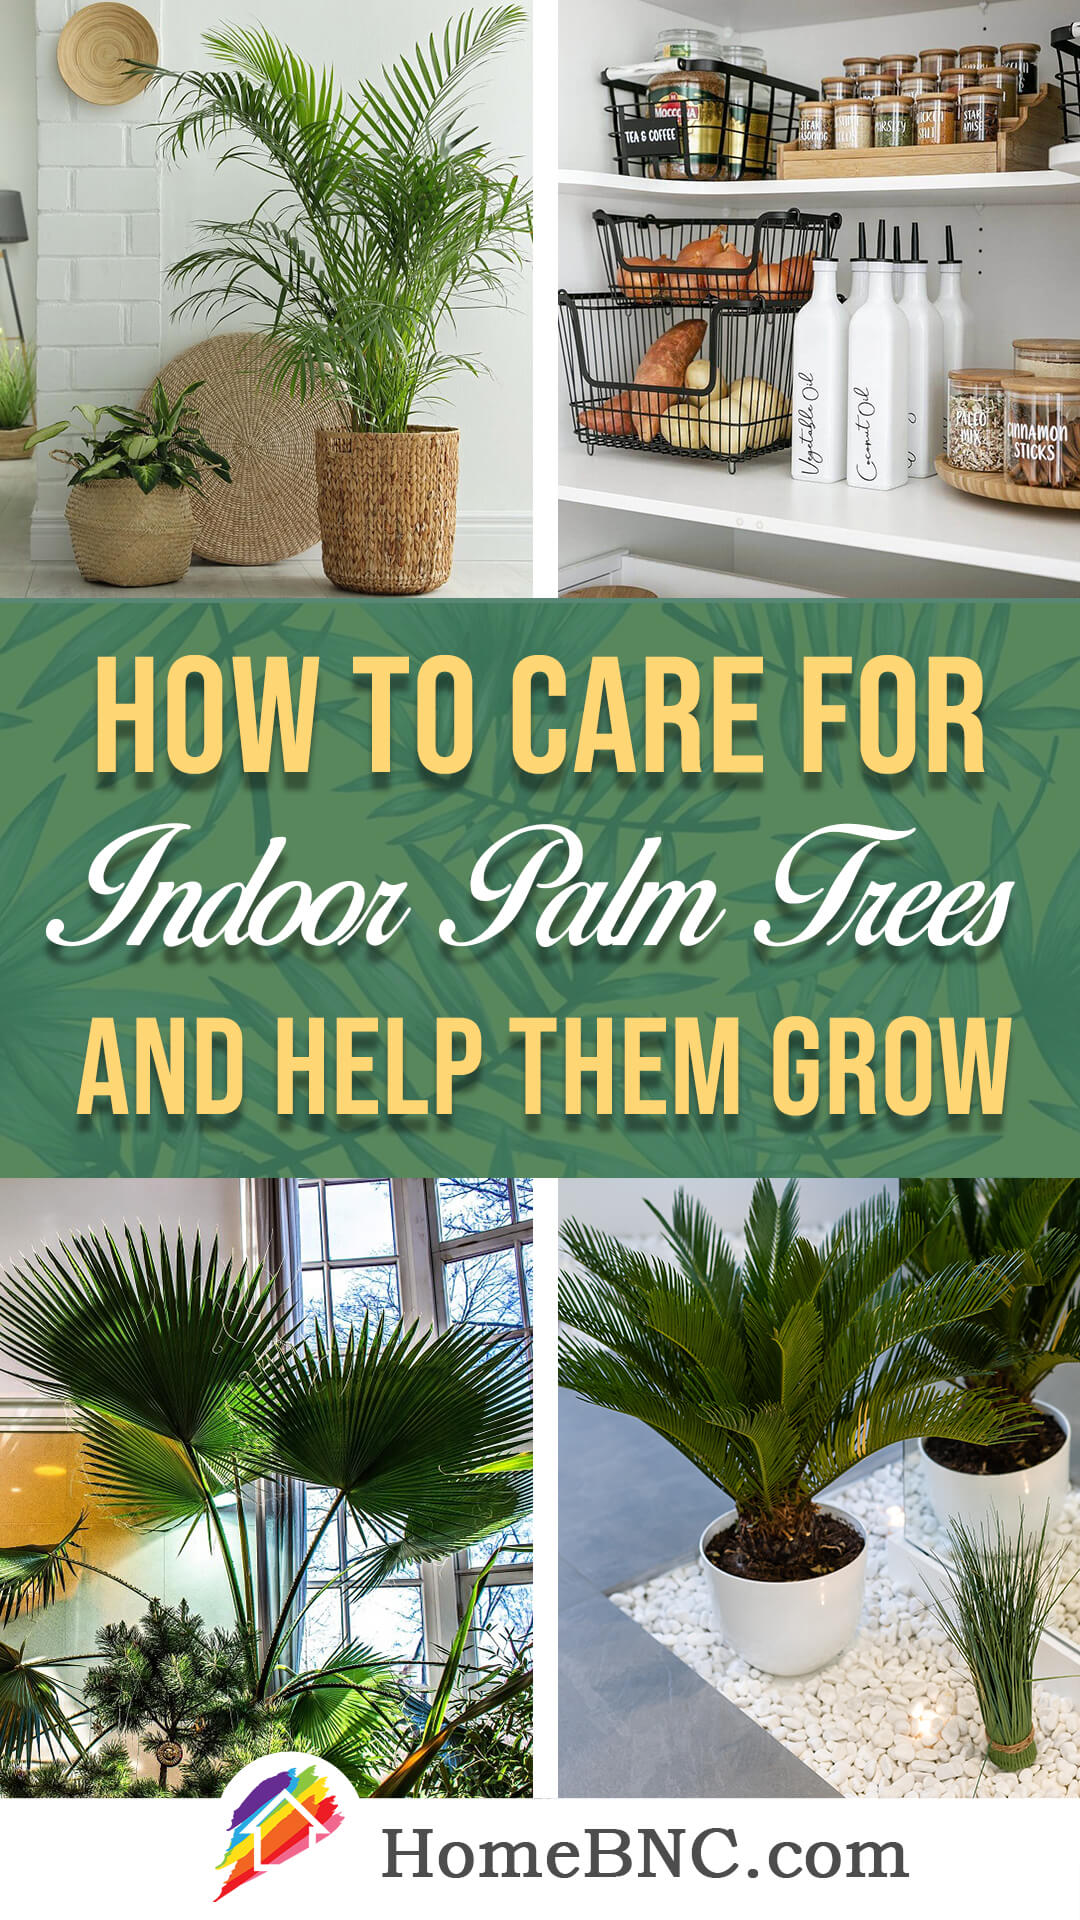 Indoor palm tree care